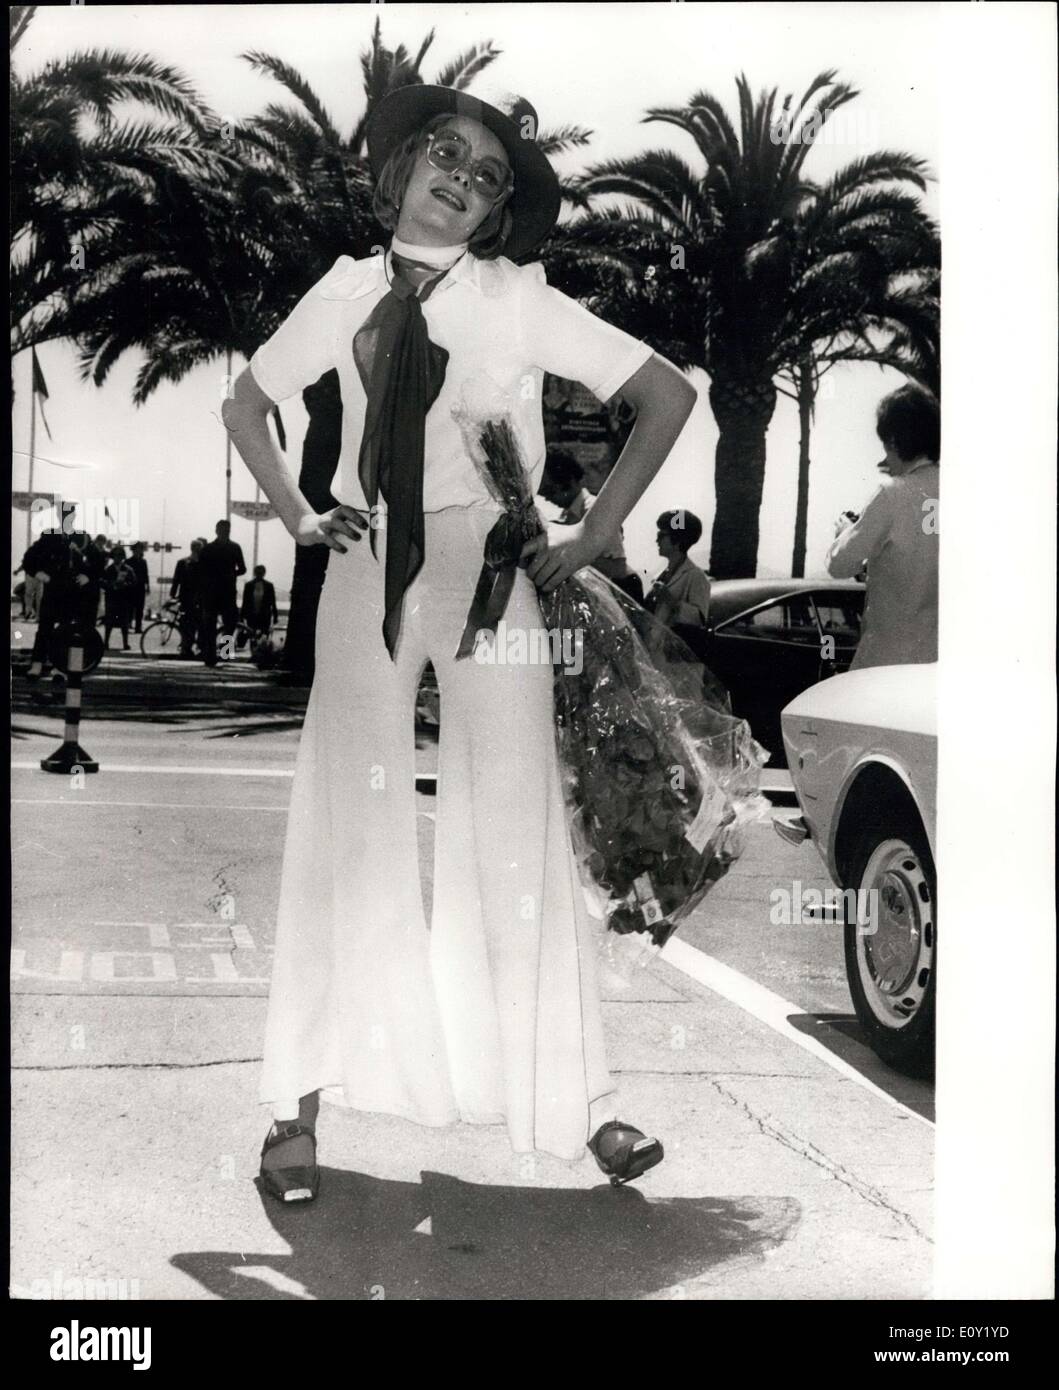 May 16, 1968 - Star of 'Joanna' At Cannes: Arriving at Cannes, Genevieve Waite, star of 'Joanna'. the British entry to the Festival. She looked most attractive in White trouser suit, a straw hat and square glasses. Stock Photo